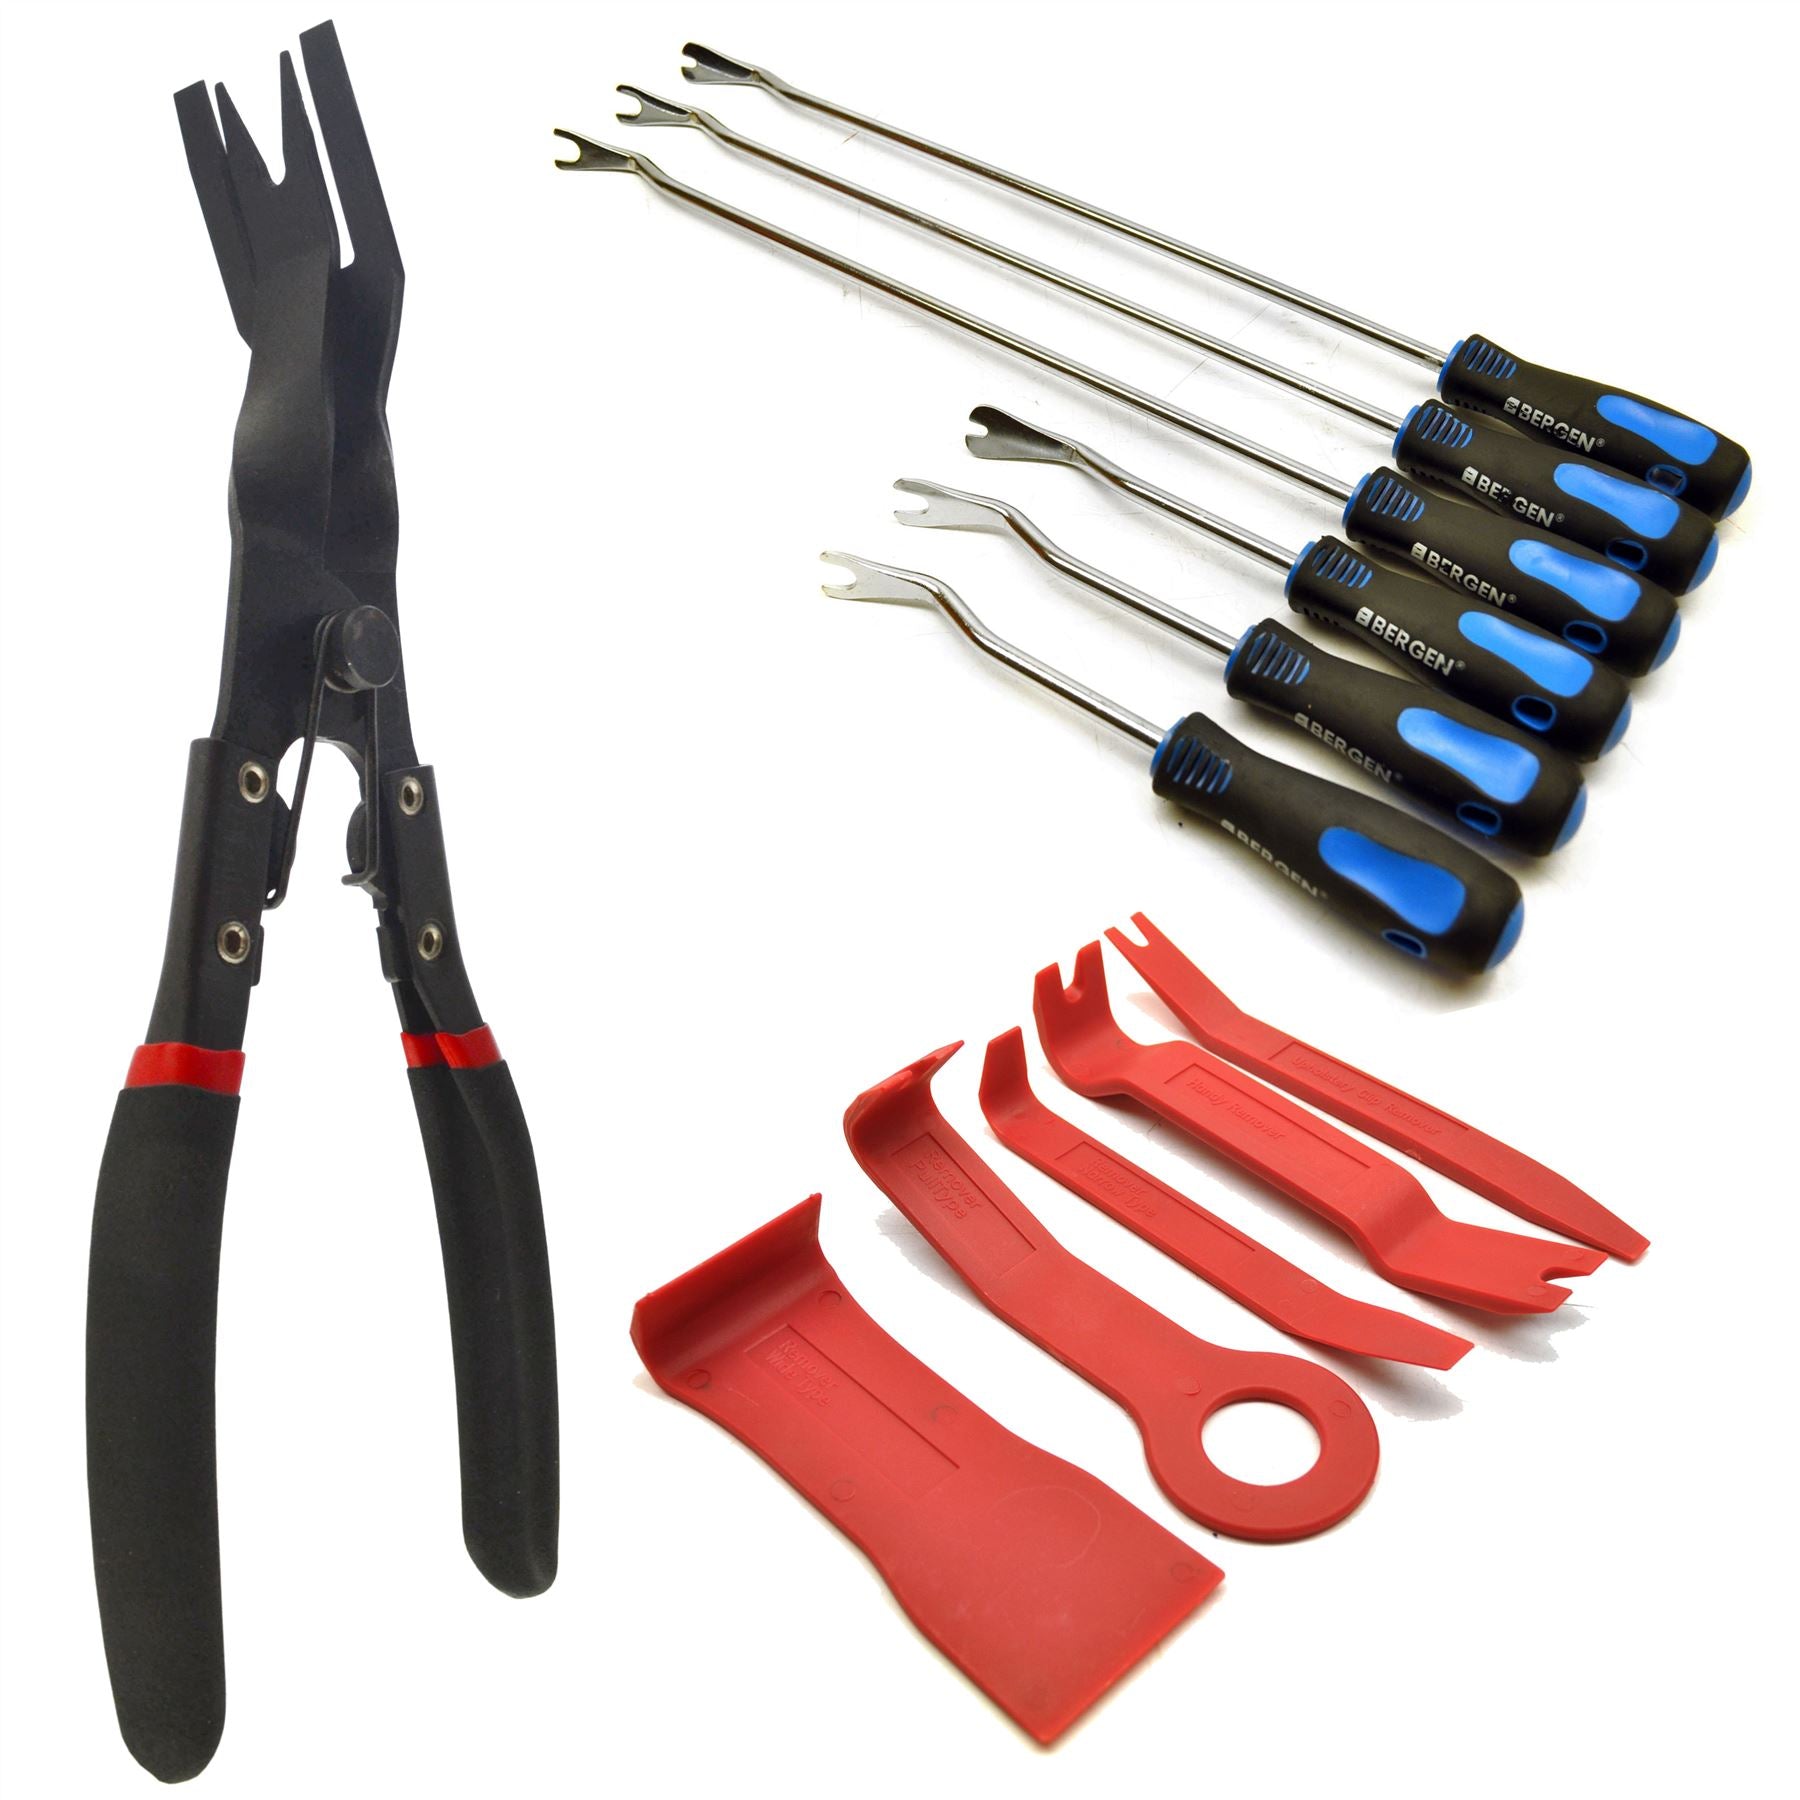 5pc Plastic & Extra Long Metal Trim Car Panel Removal Tools Pliers Non Scratch